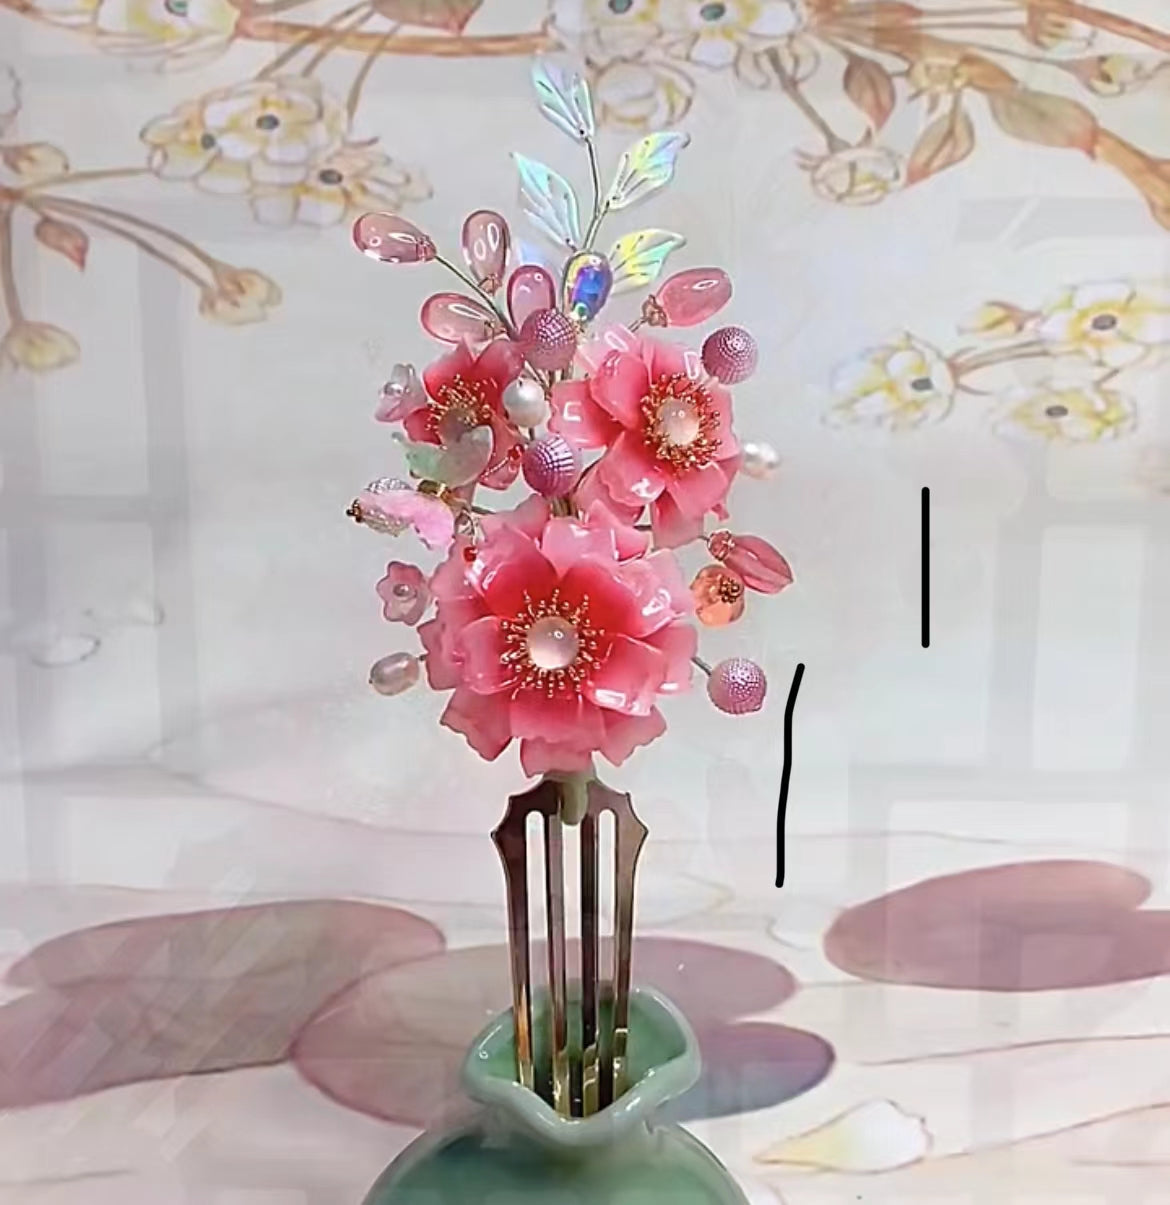 Handmade creative flower hair products coloured glaze custom gift personalized accessories - Duo Fashion